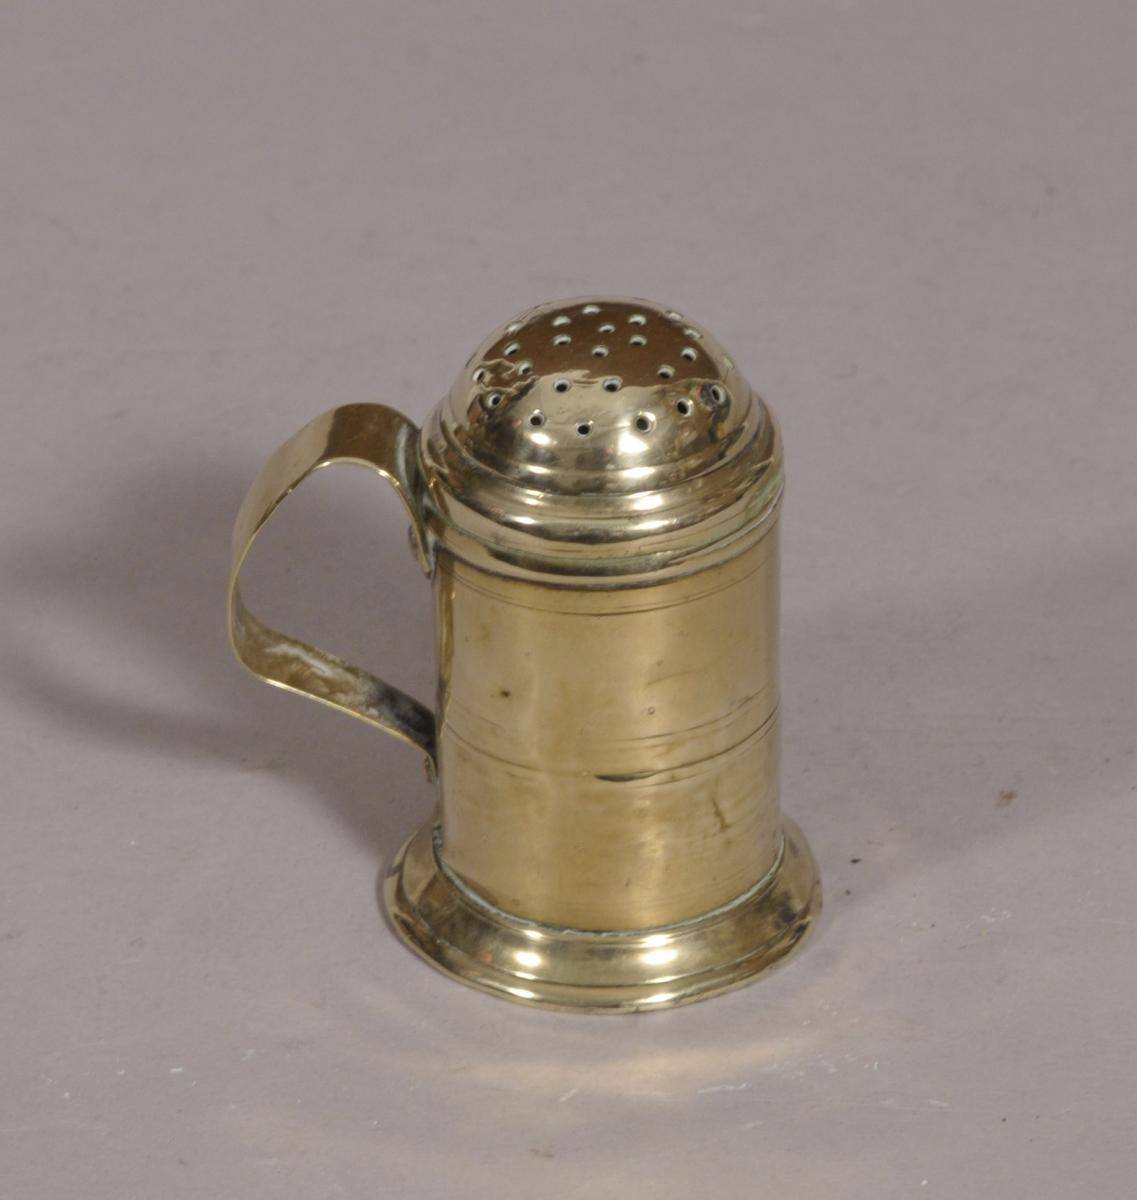 S/4303 Antique Mid 18th Century Brass Spice Dredger of the Georgian Period